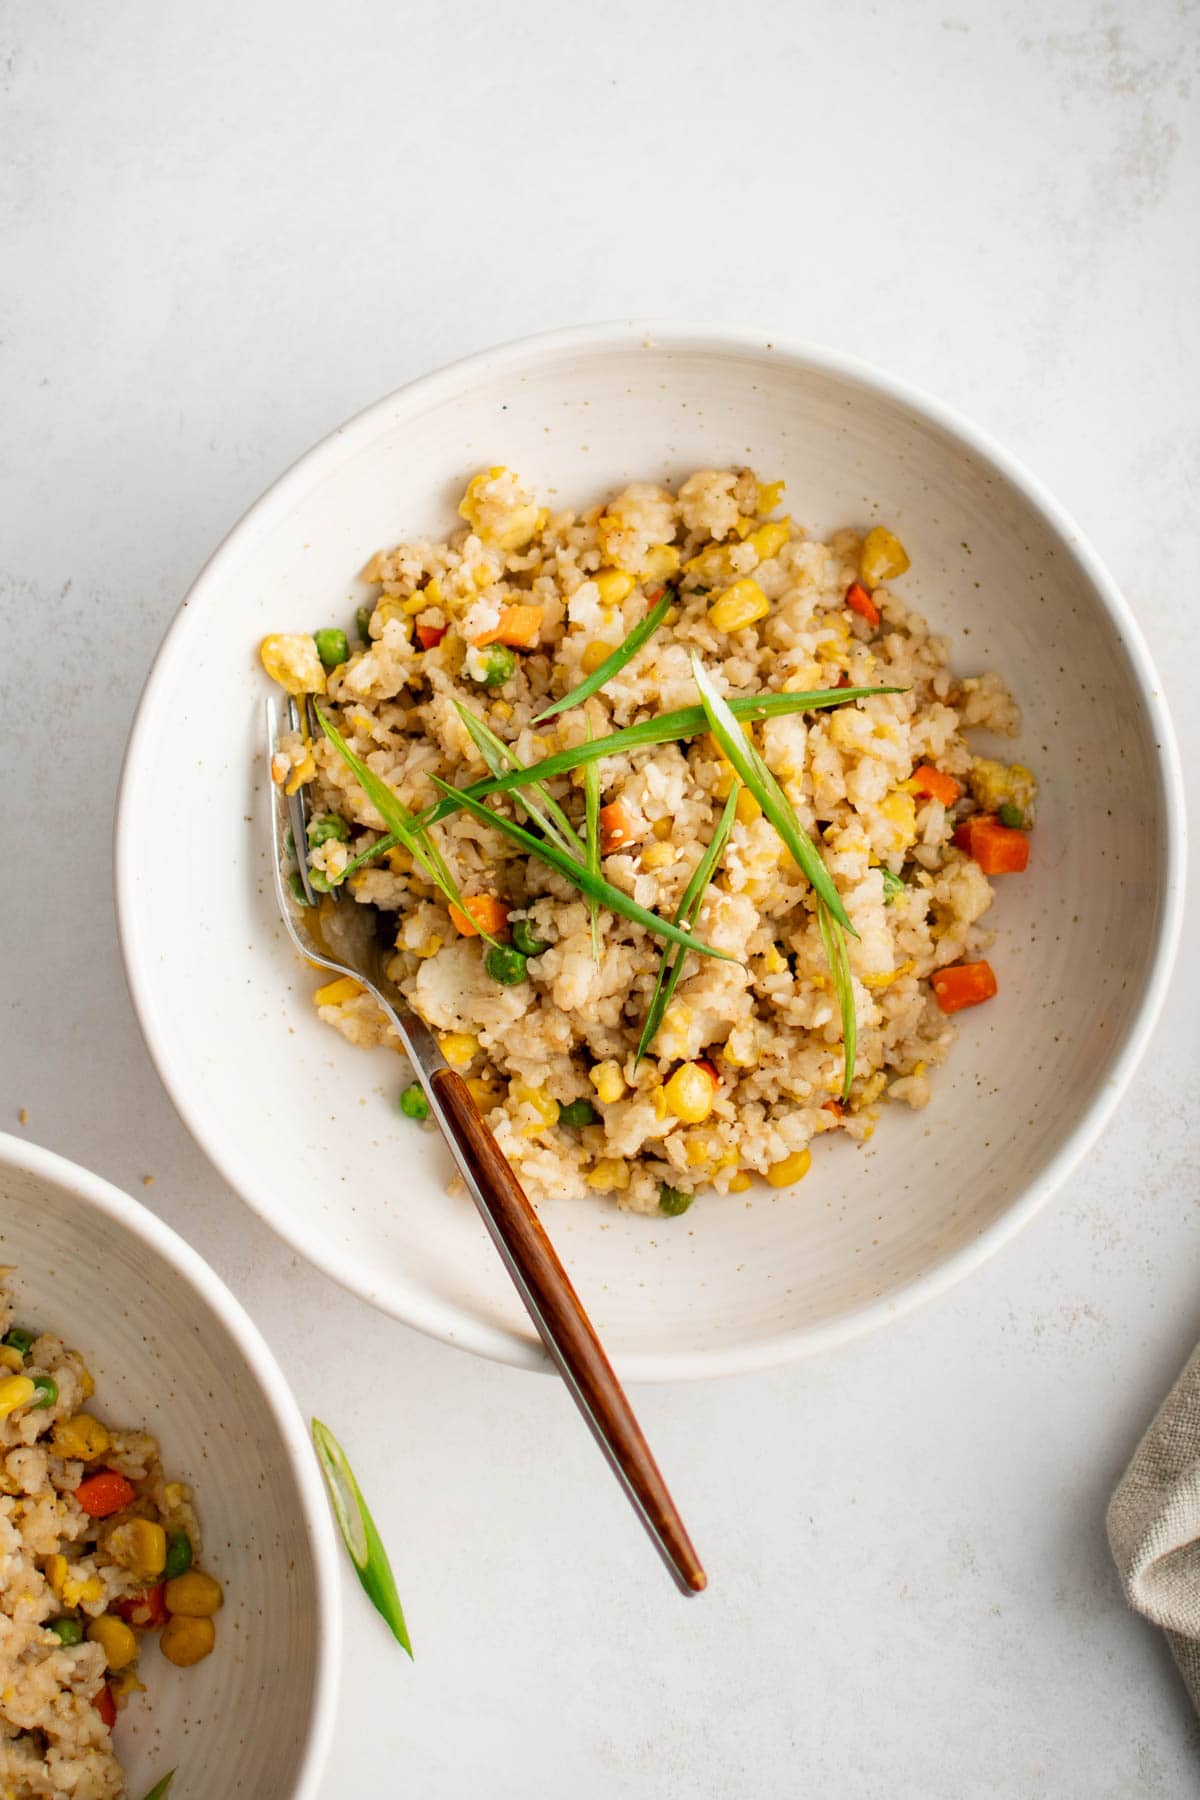 Fried rice in a white bowl with a wooden spoon.